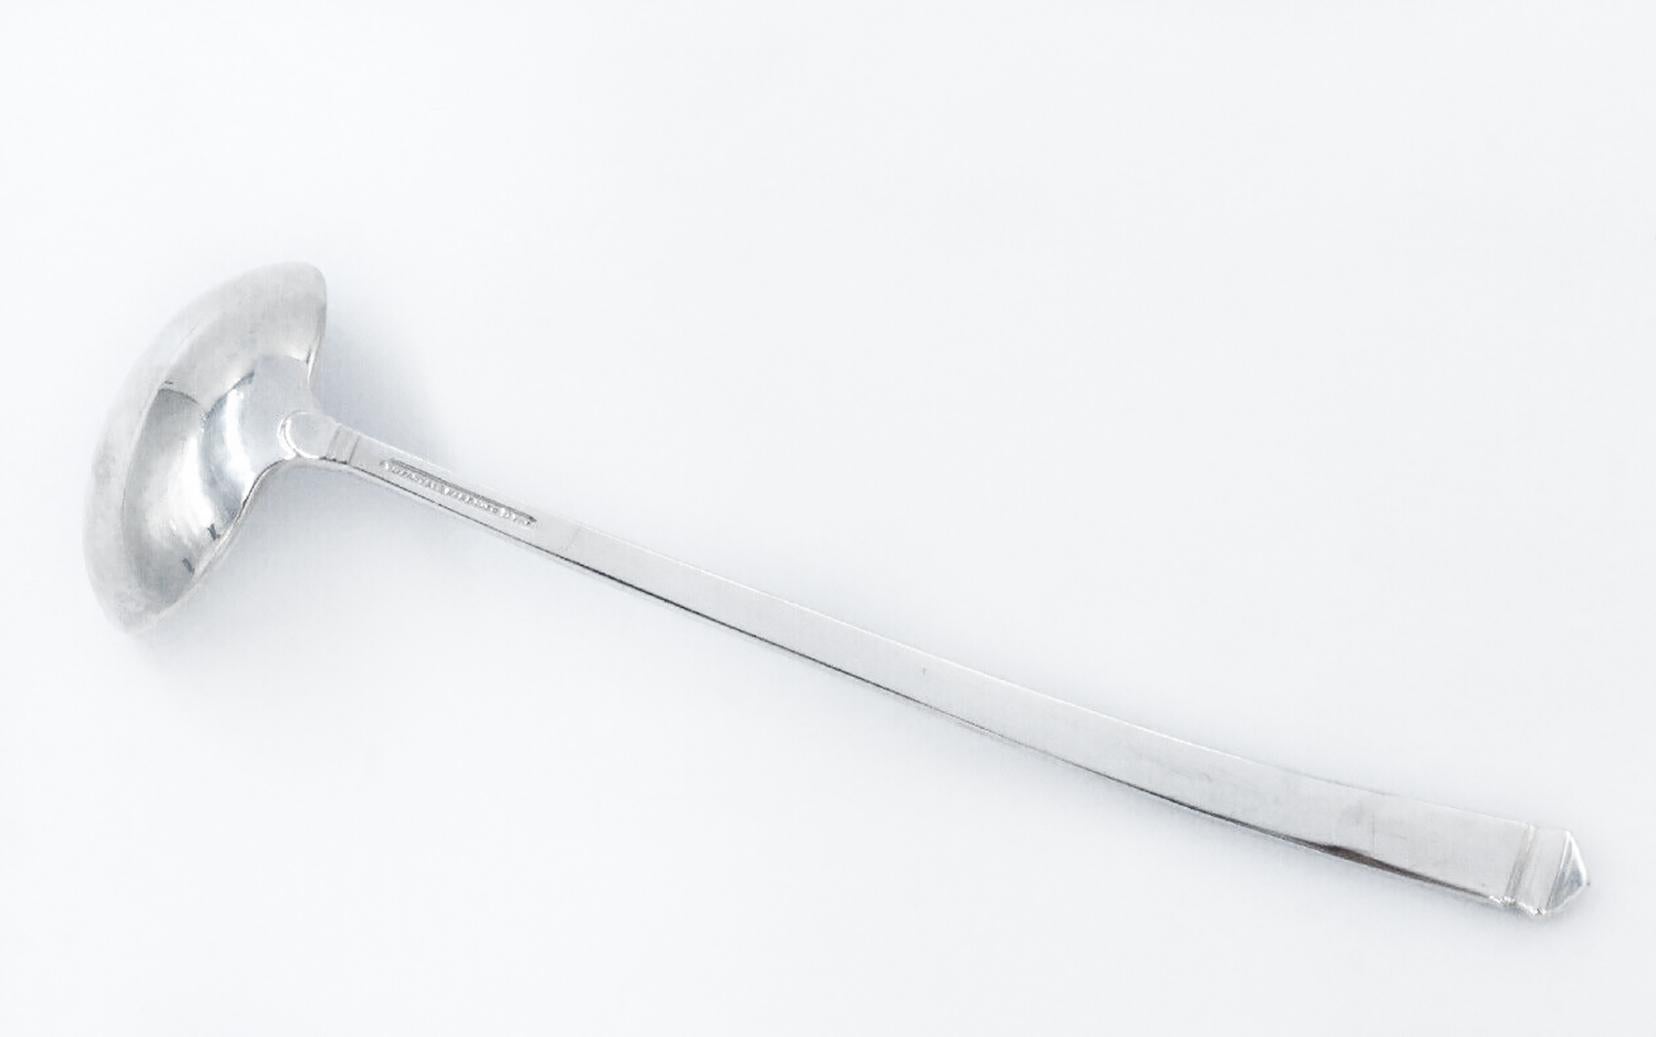 Tiffany & Co.
Sterling Silver 925
Ladle Gravy Spoon
Hallmarked: Tiffany & Co Sterling M PAT.
Approx. 55.1 grams
Approx. 7 inches long
In great looking condition, wear consistent with time and light use, 
see images please
No original box or papers
